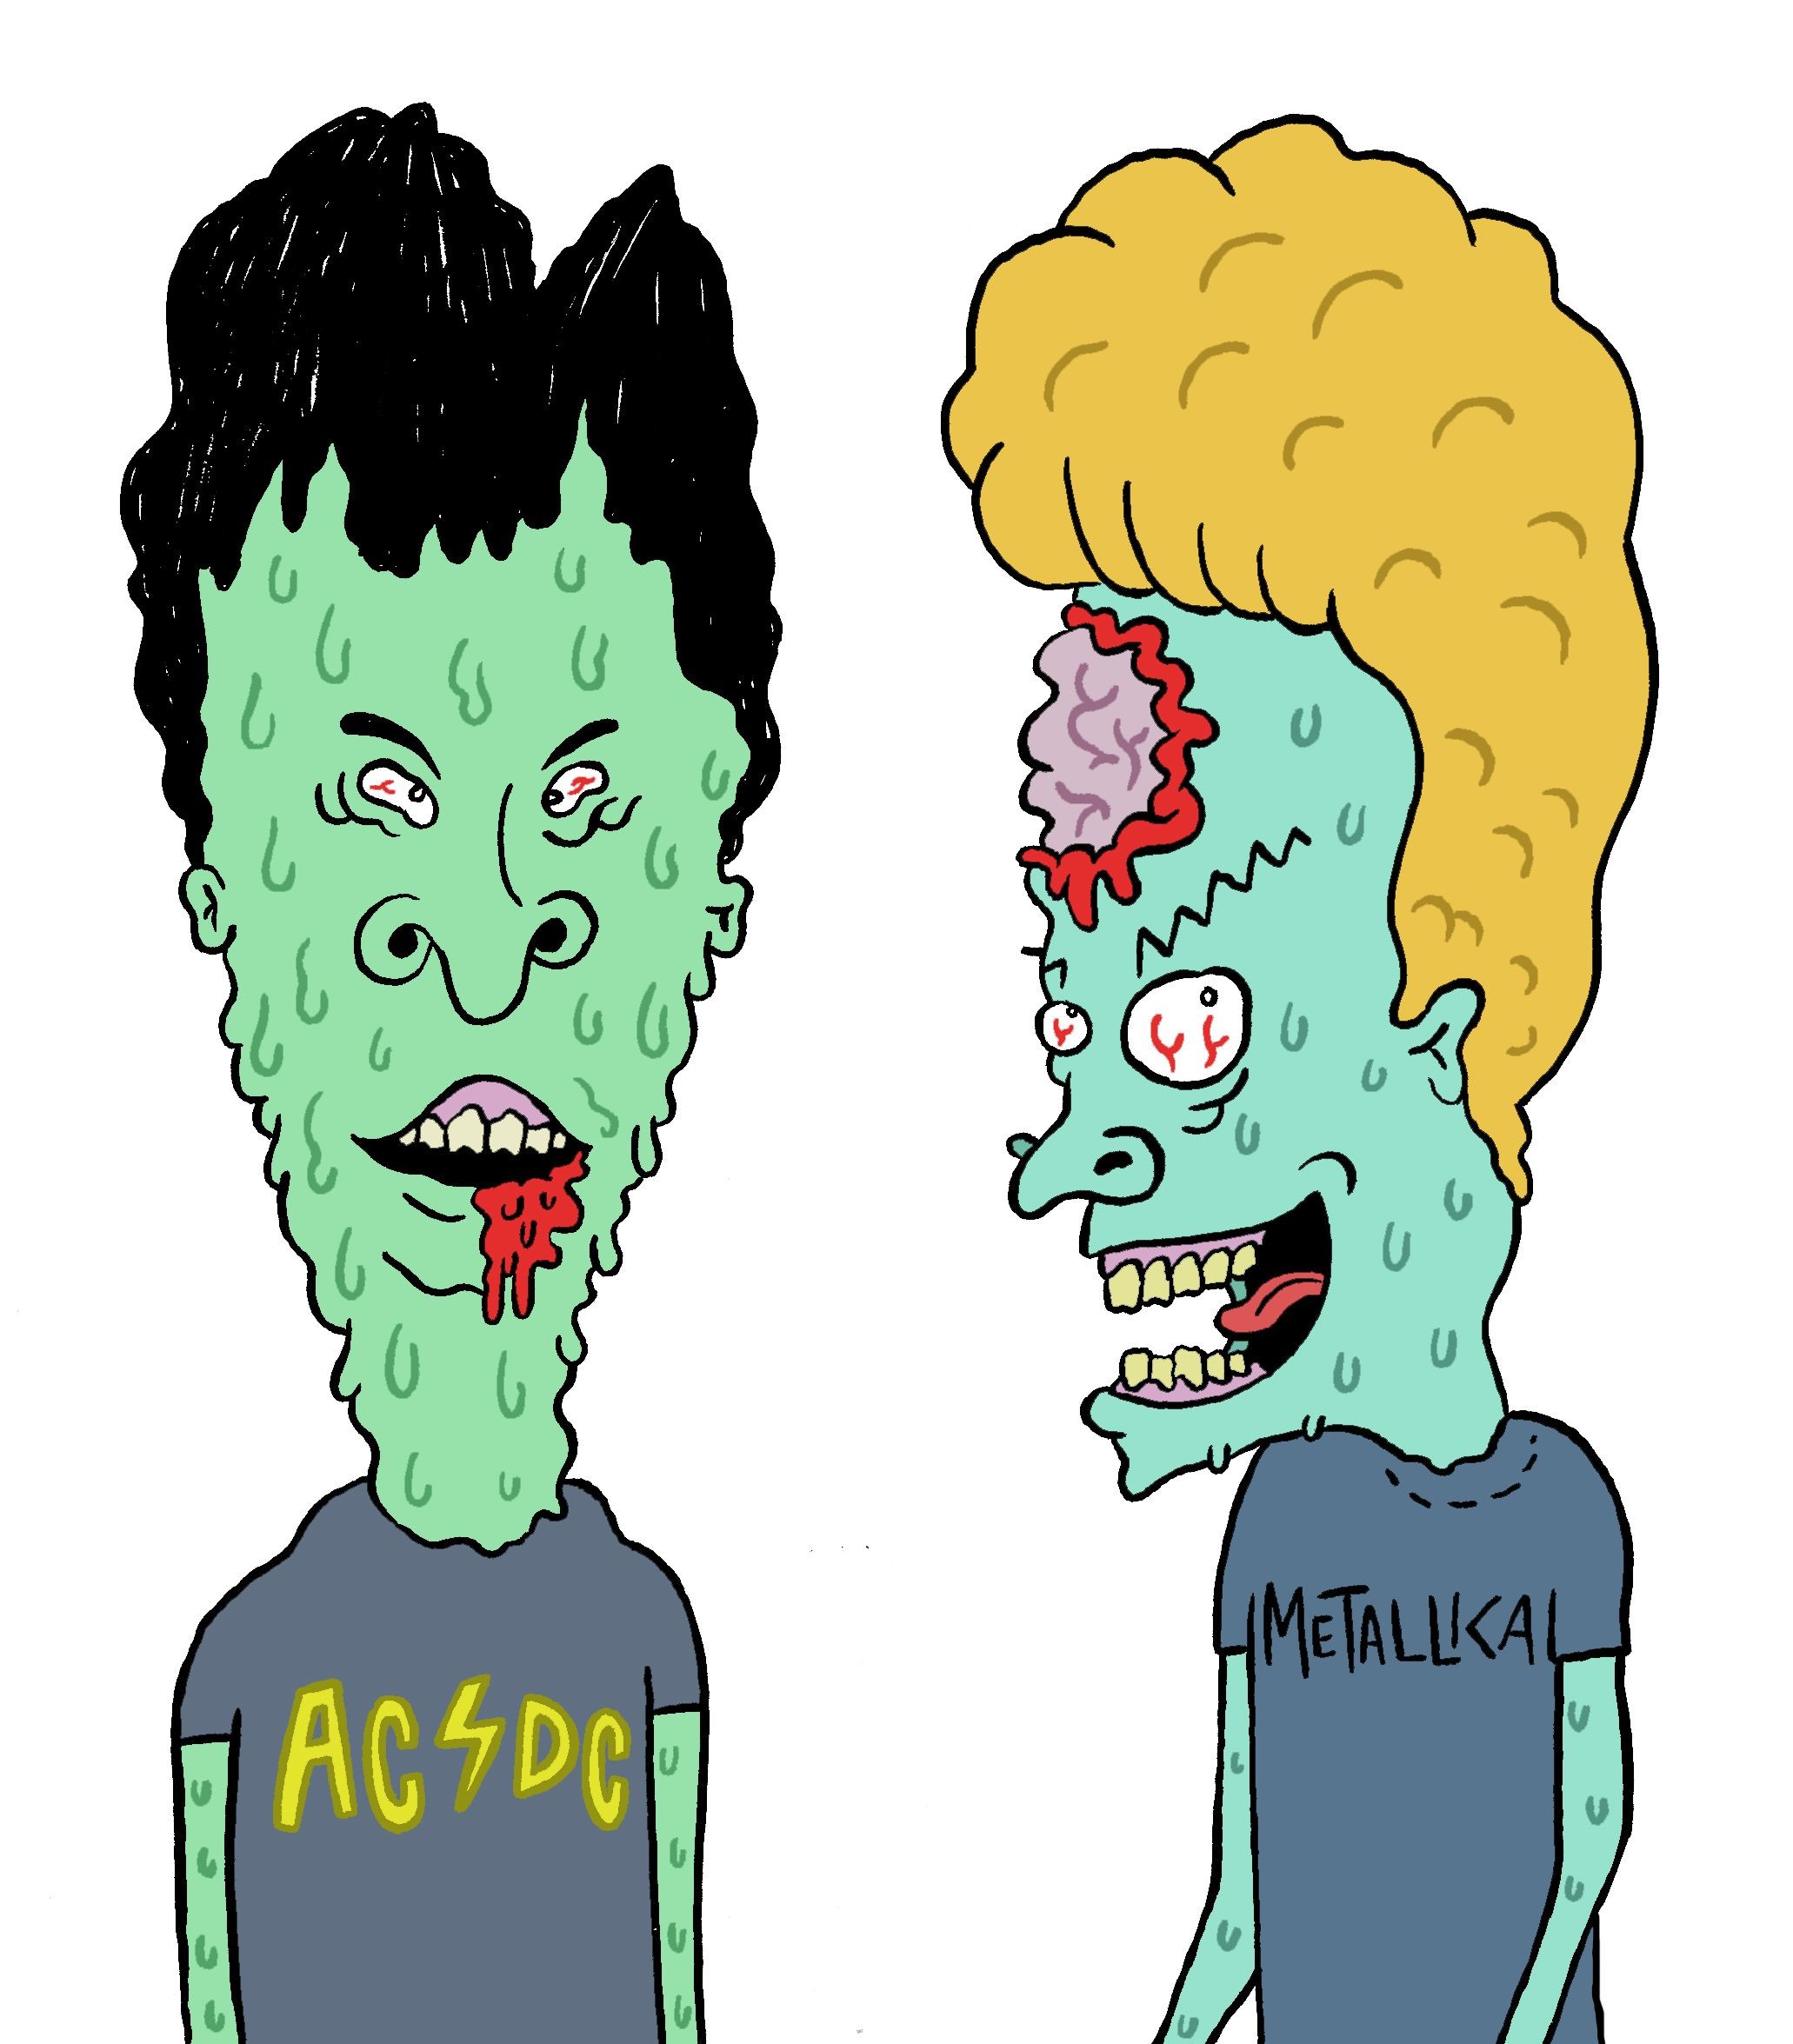 Beavis And Butthead Backgrounds